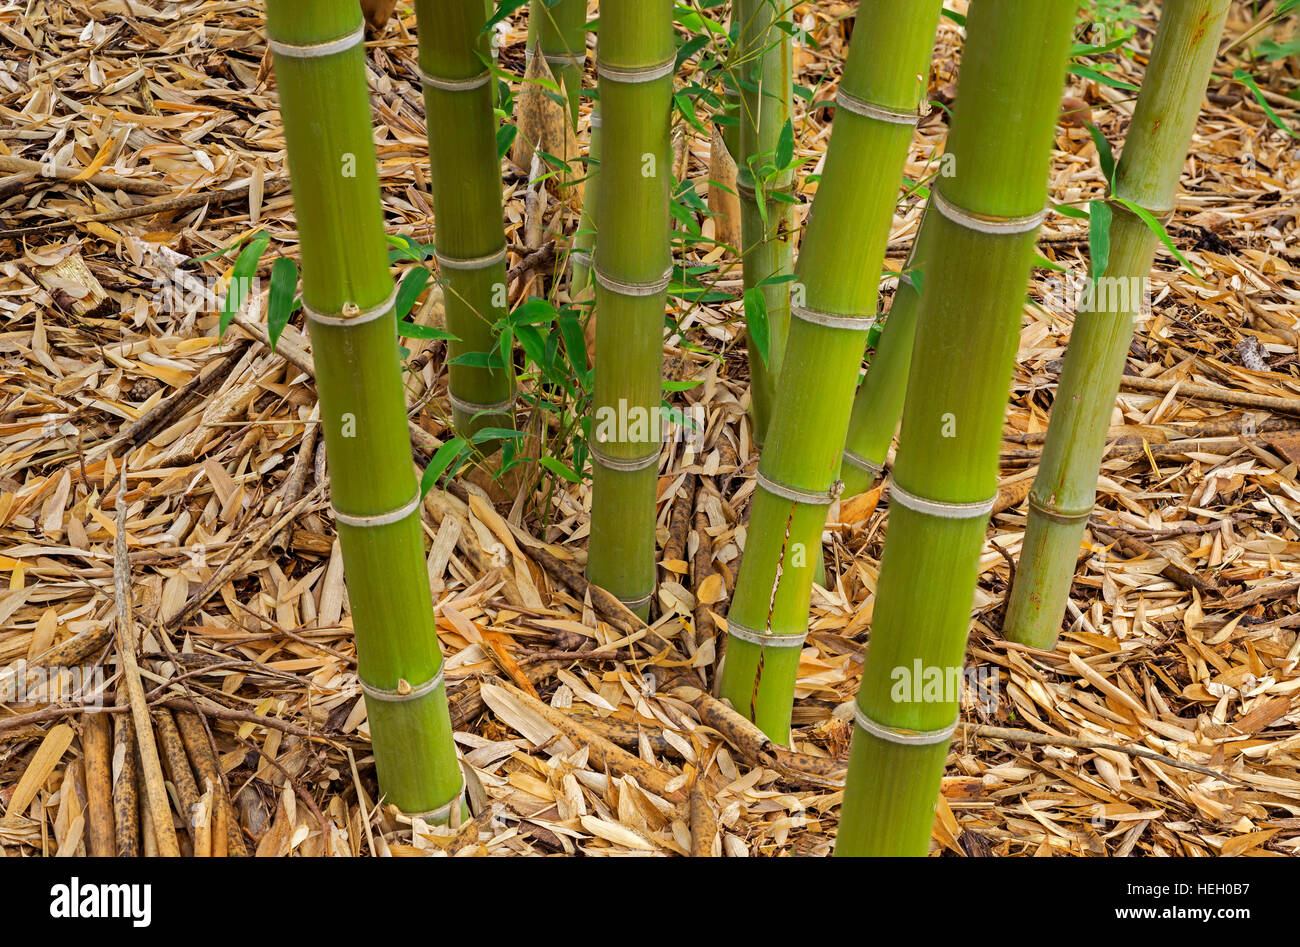 USA, Oregon, Portland, Hoyt Arboretum, Bamboo (Phyllostachys parvifolia), this cold tolerant species is native to China. Stock Photo